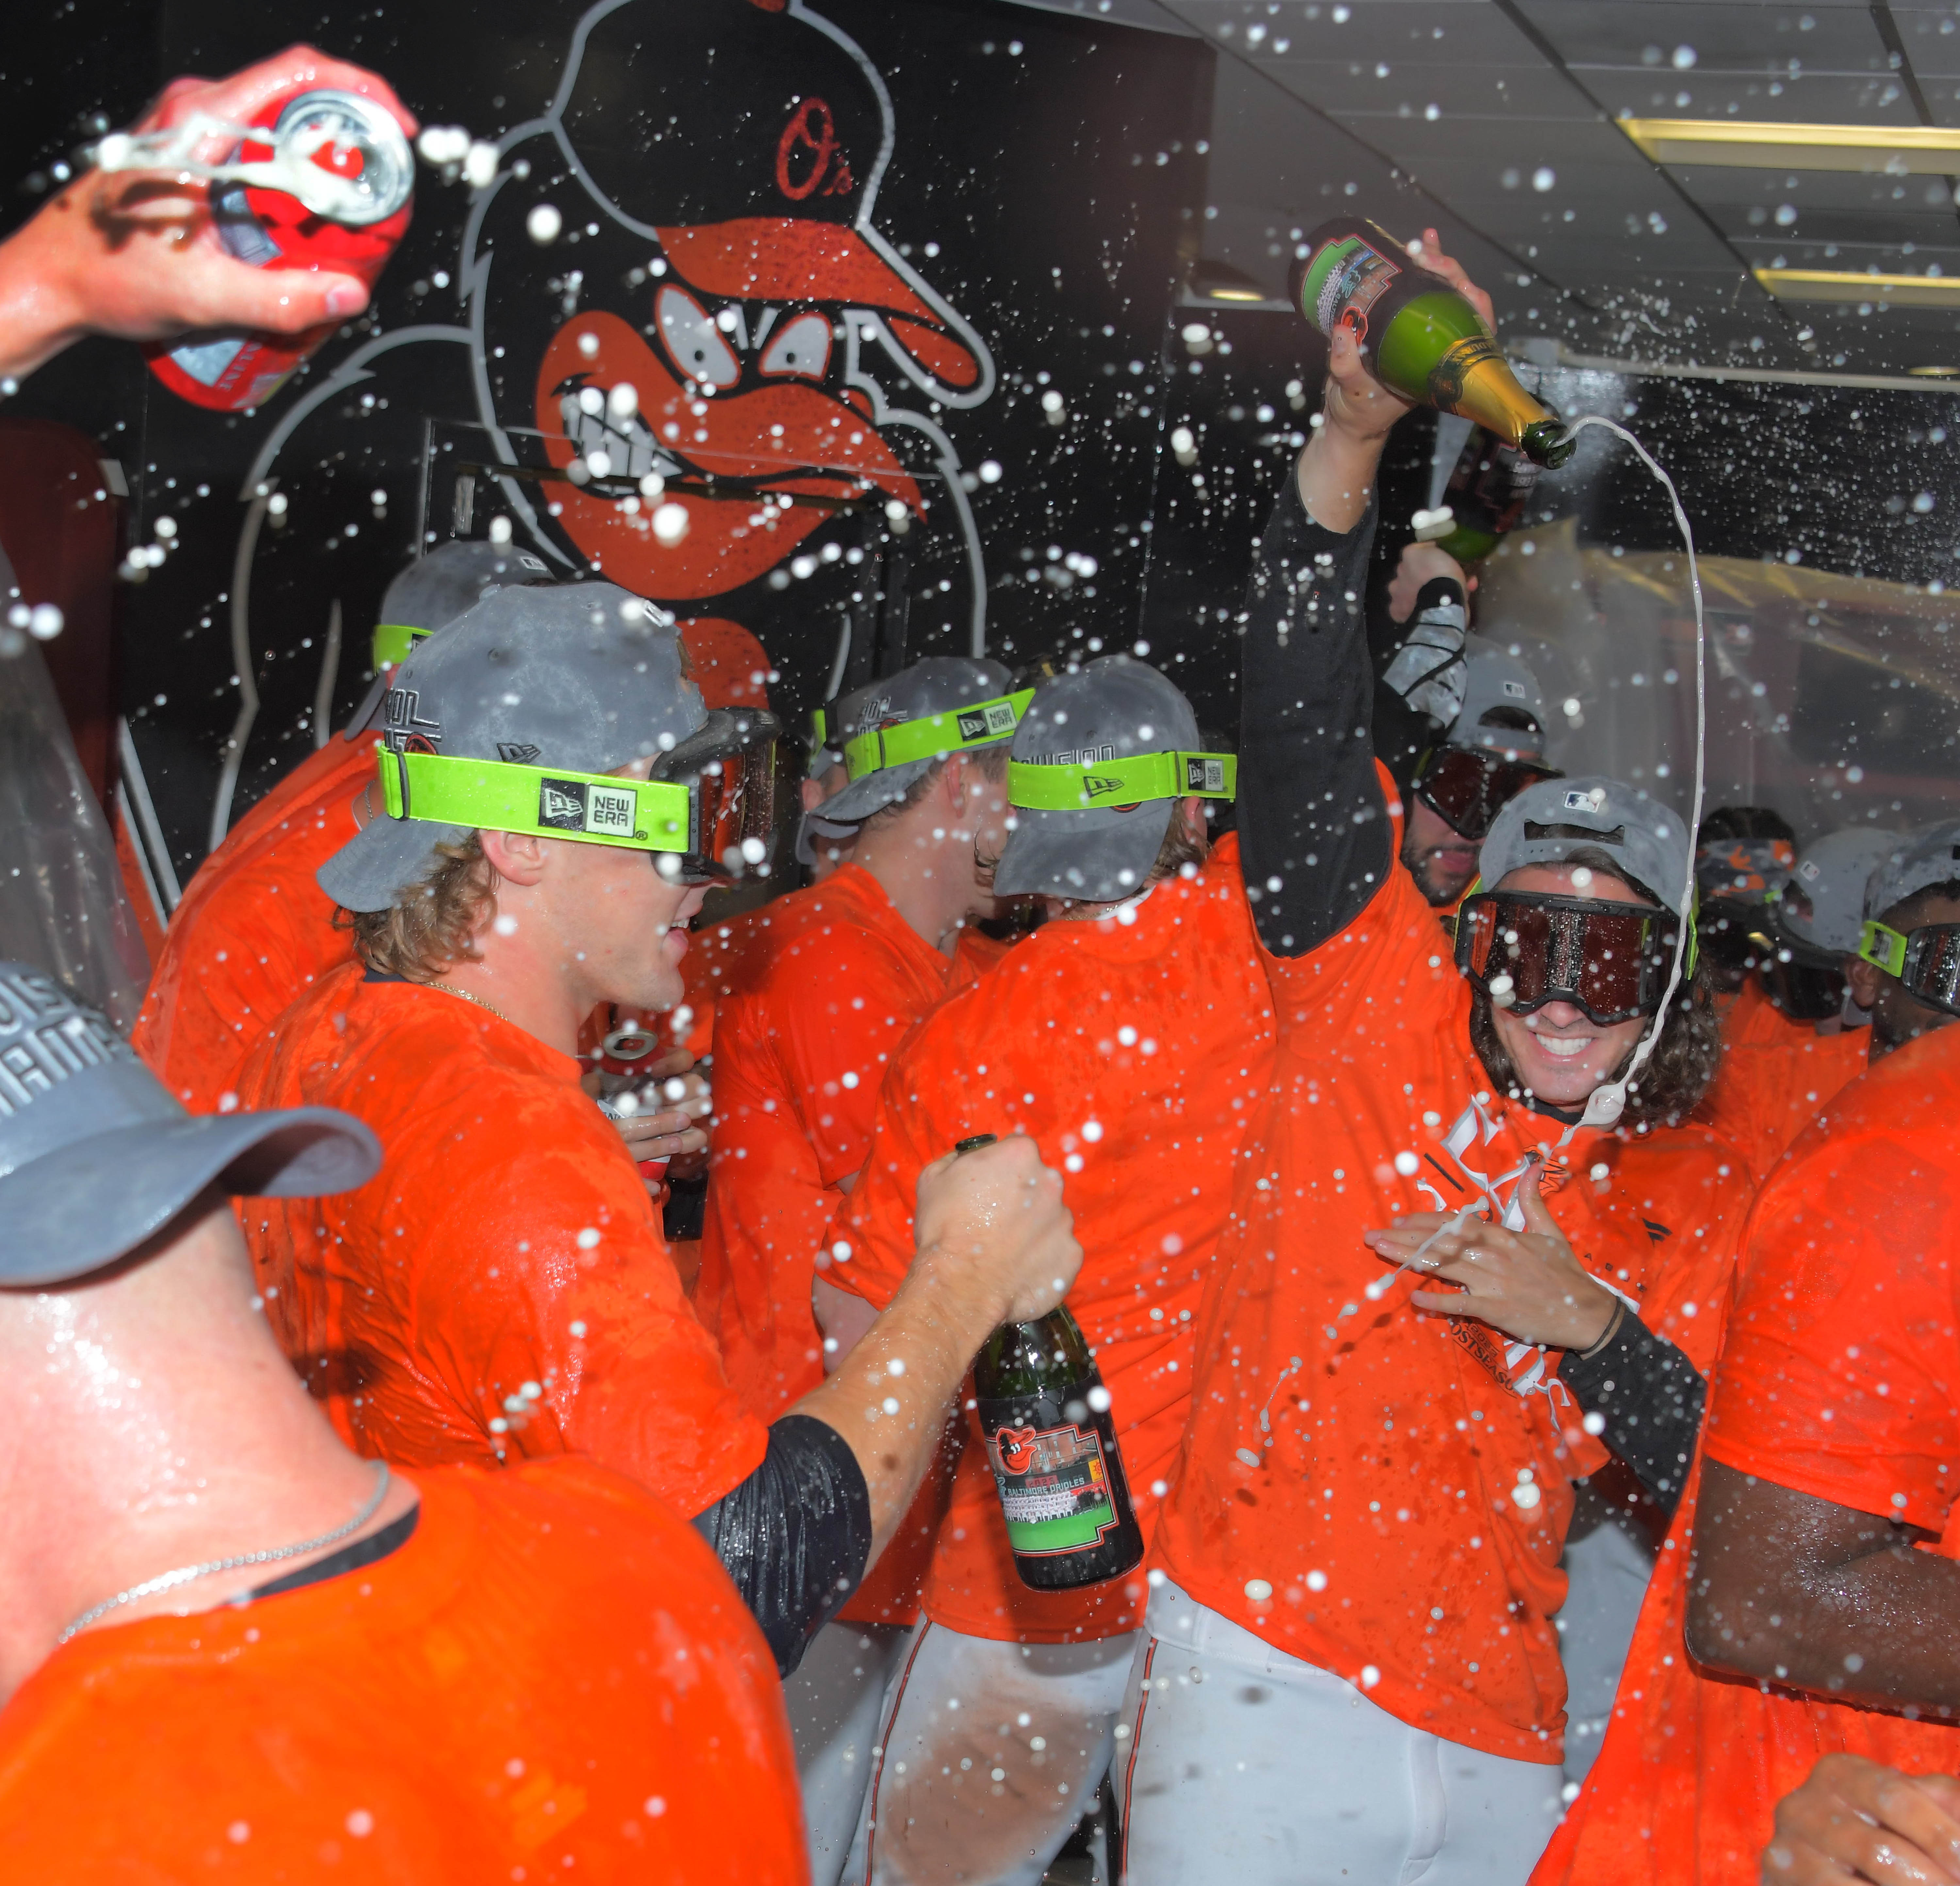 Baltimore Orioles on X: Celebrate Maryland with us tonight! The